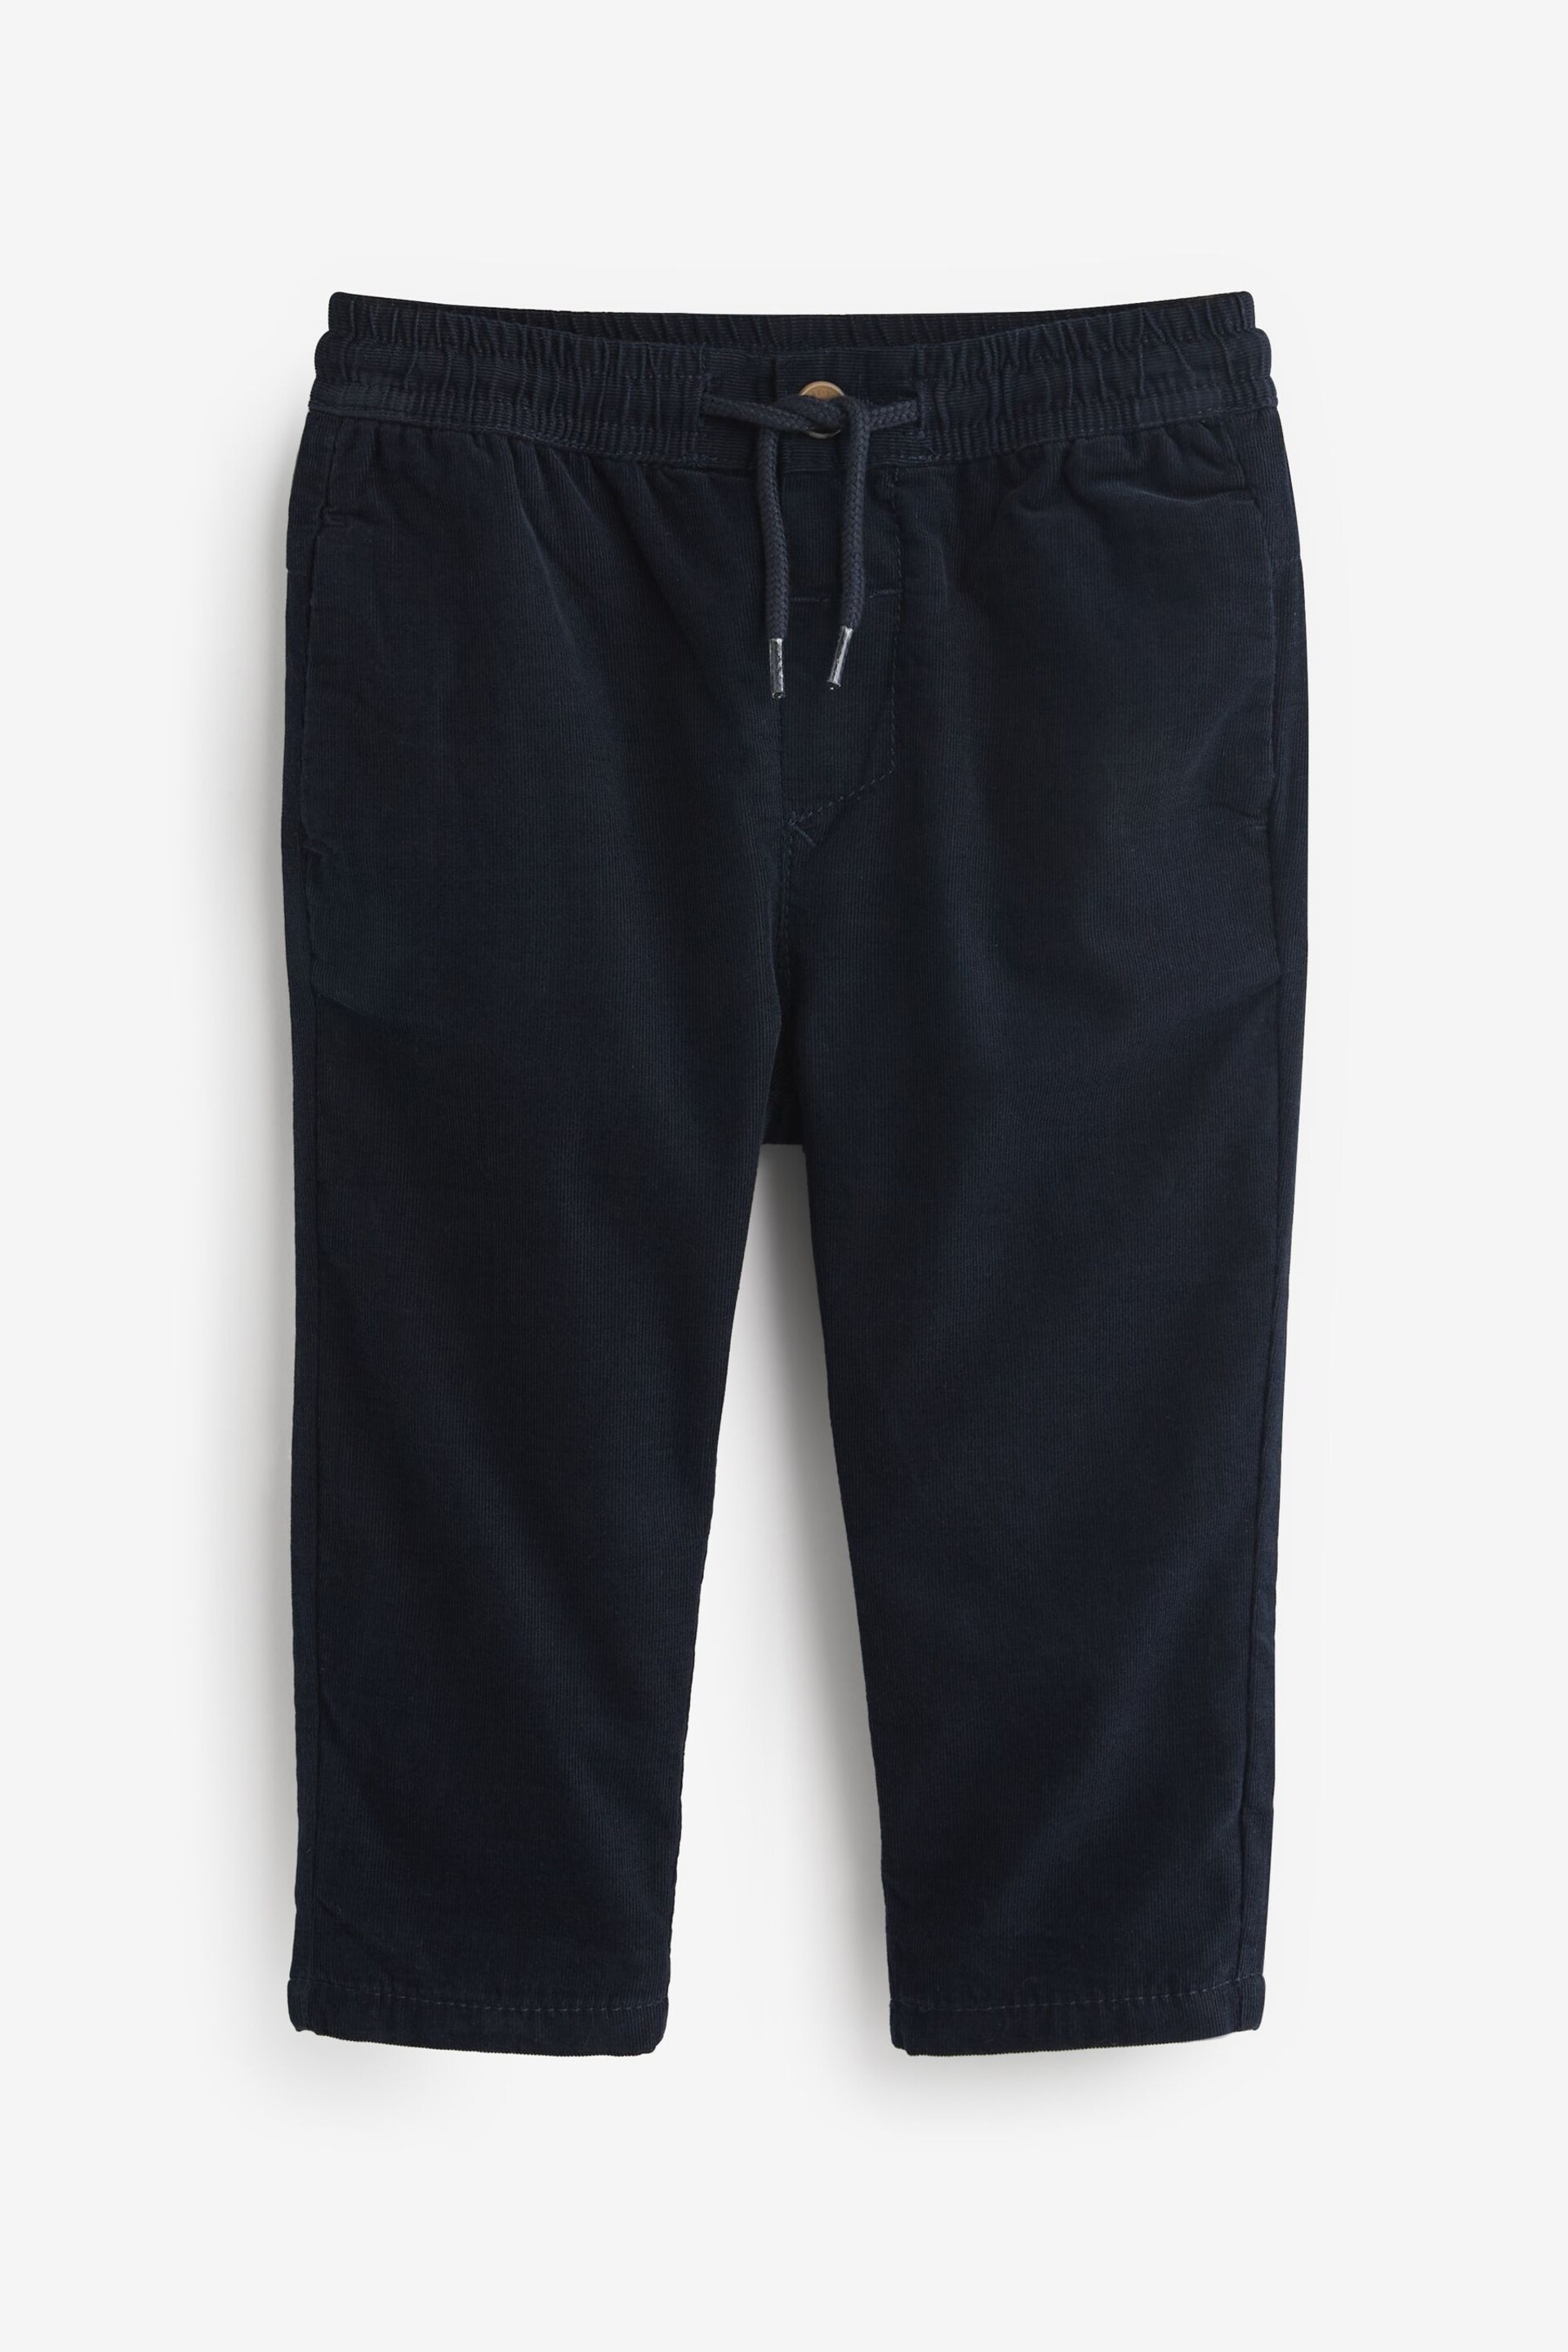 Navy Blue Corduroy Pull-On Trousers (3mths-7yrs) - Image 4 of 6